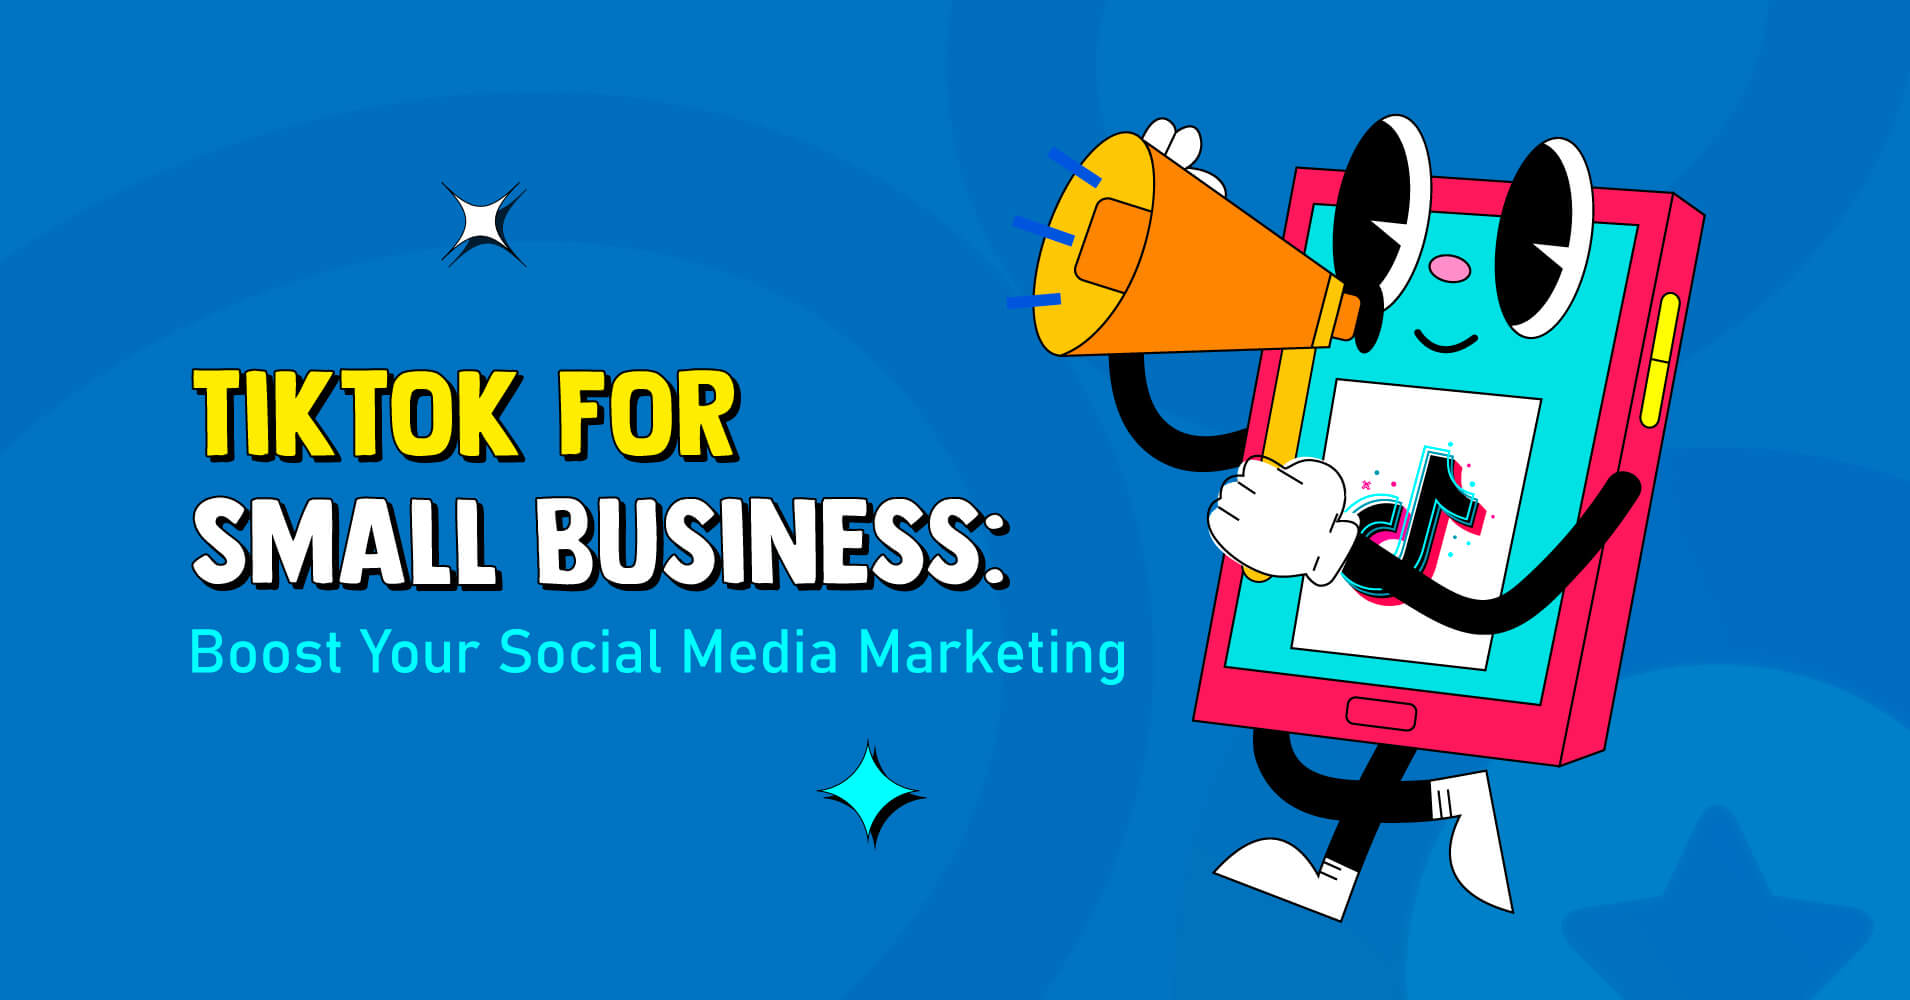 TikTok for Small Business: Boost Your Social Media Marketing